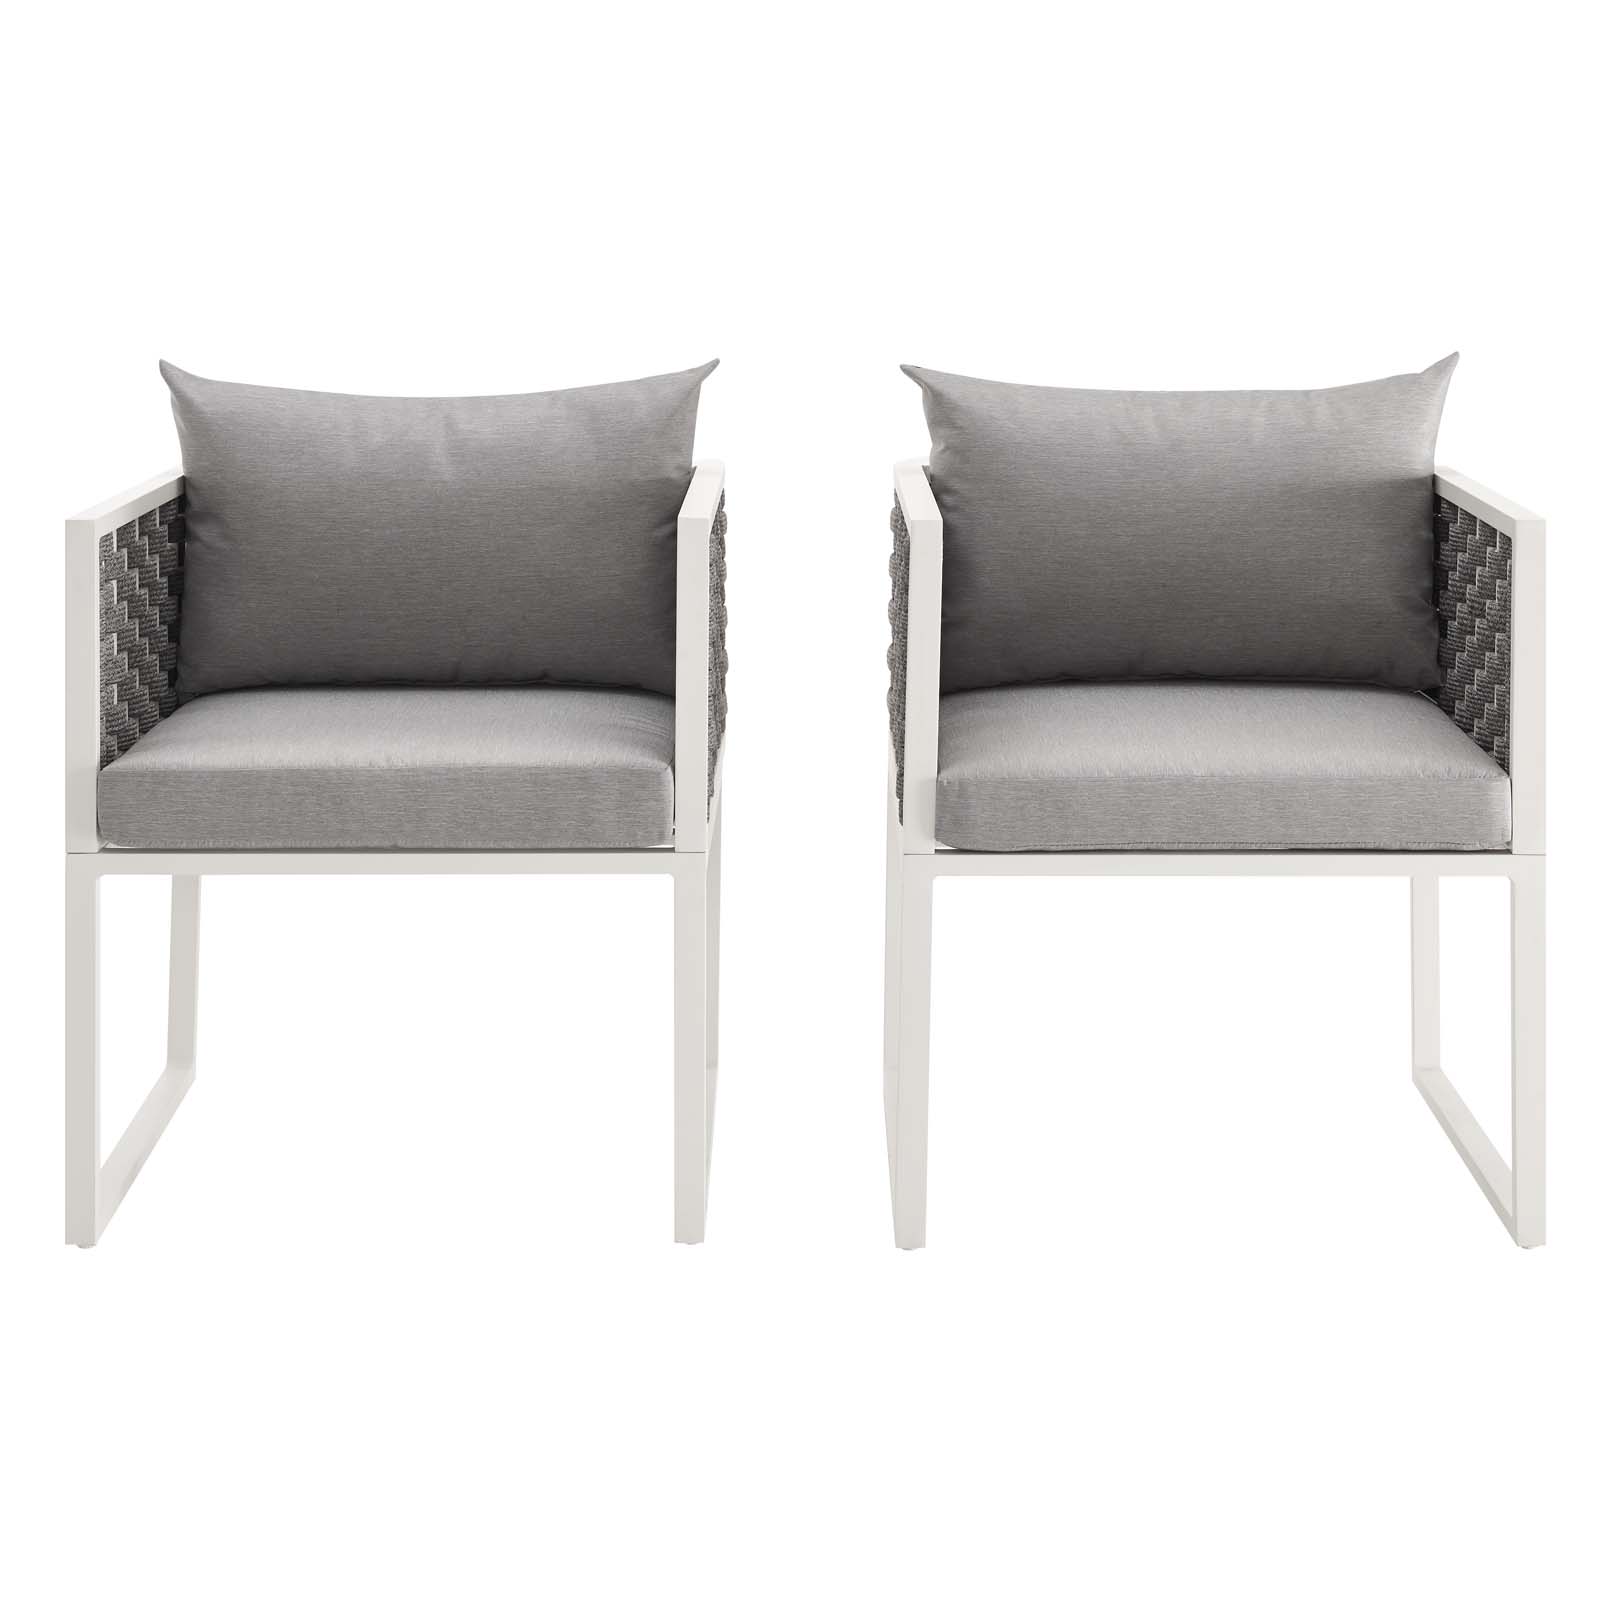 Modern Contemporary Urban Outdoor Patio Balcony Garden Furniture Side Dining Chair Armchair, Set of Two, Fabric Aluminium, White Grey Gray - image 4 of 6